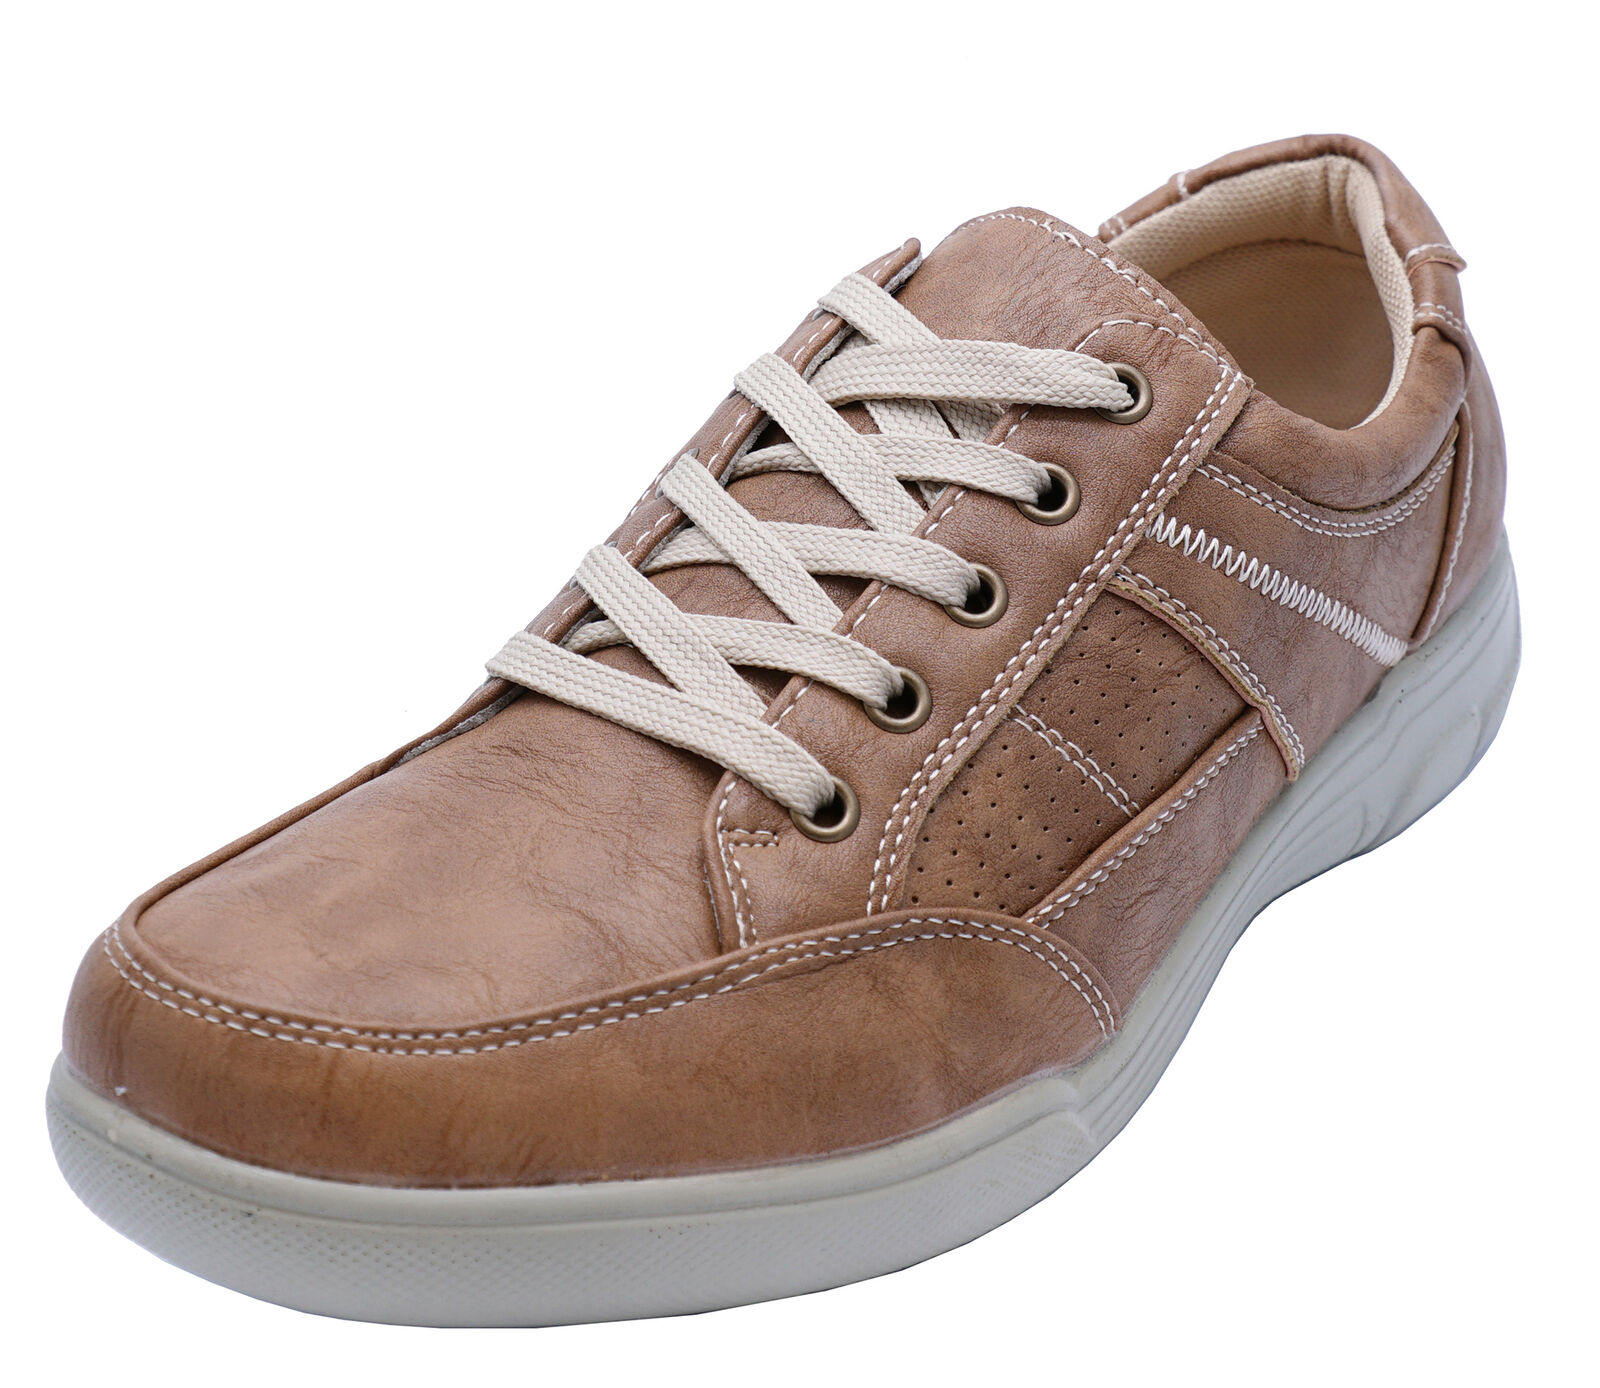 MENS TAN LACE-UP COMFY LIGHTWEIGHT SMART CASUAL WALKING TRAINER SHOES ...